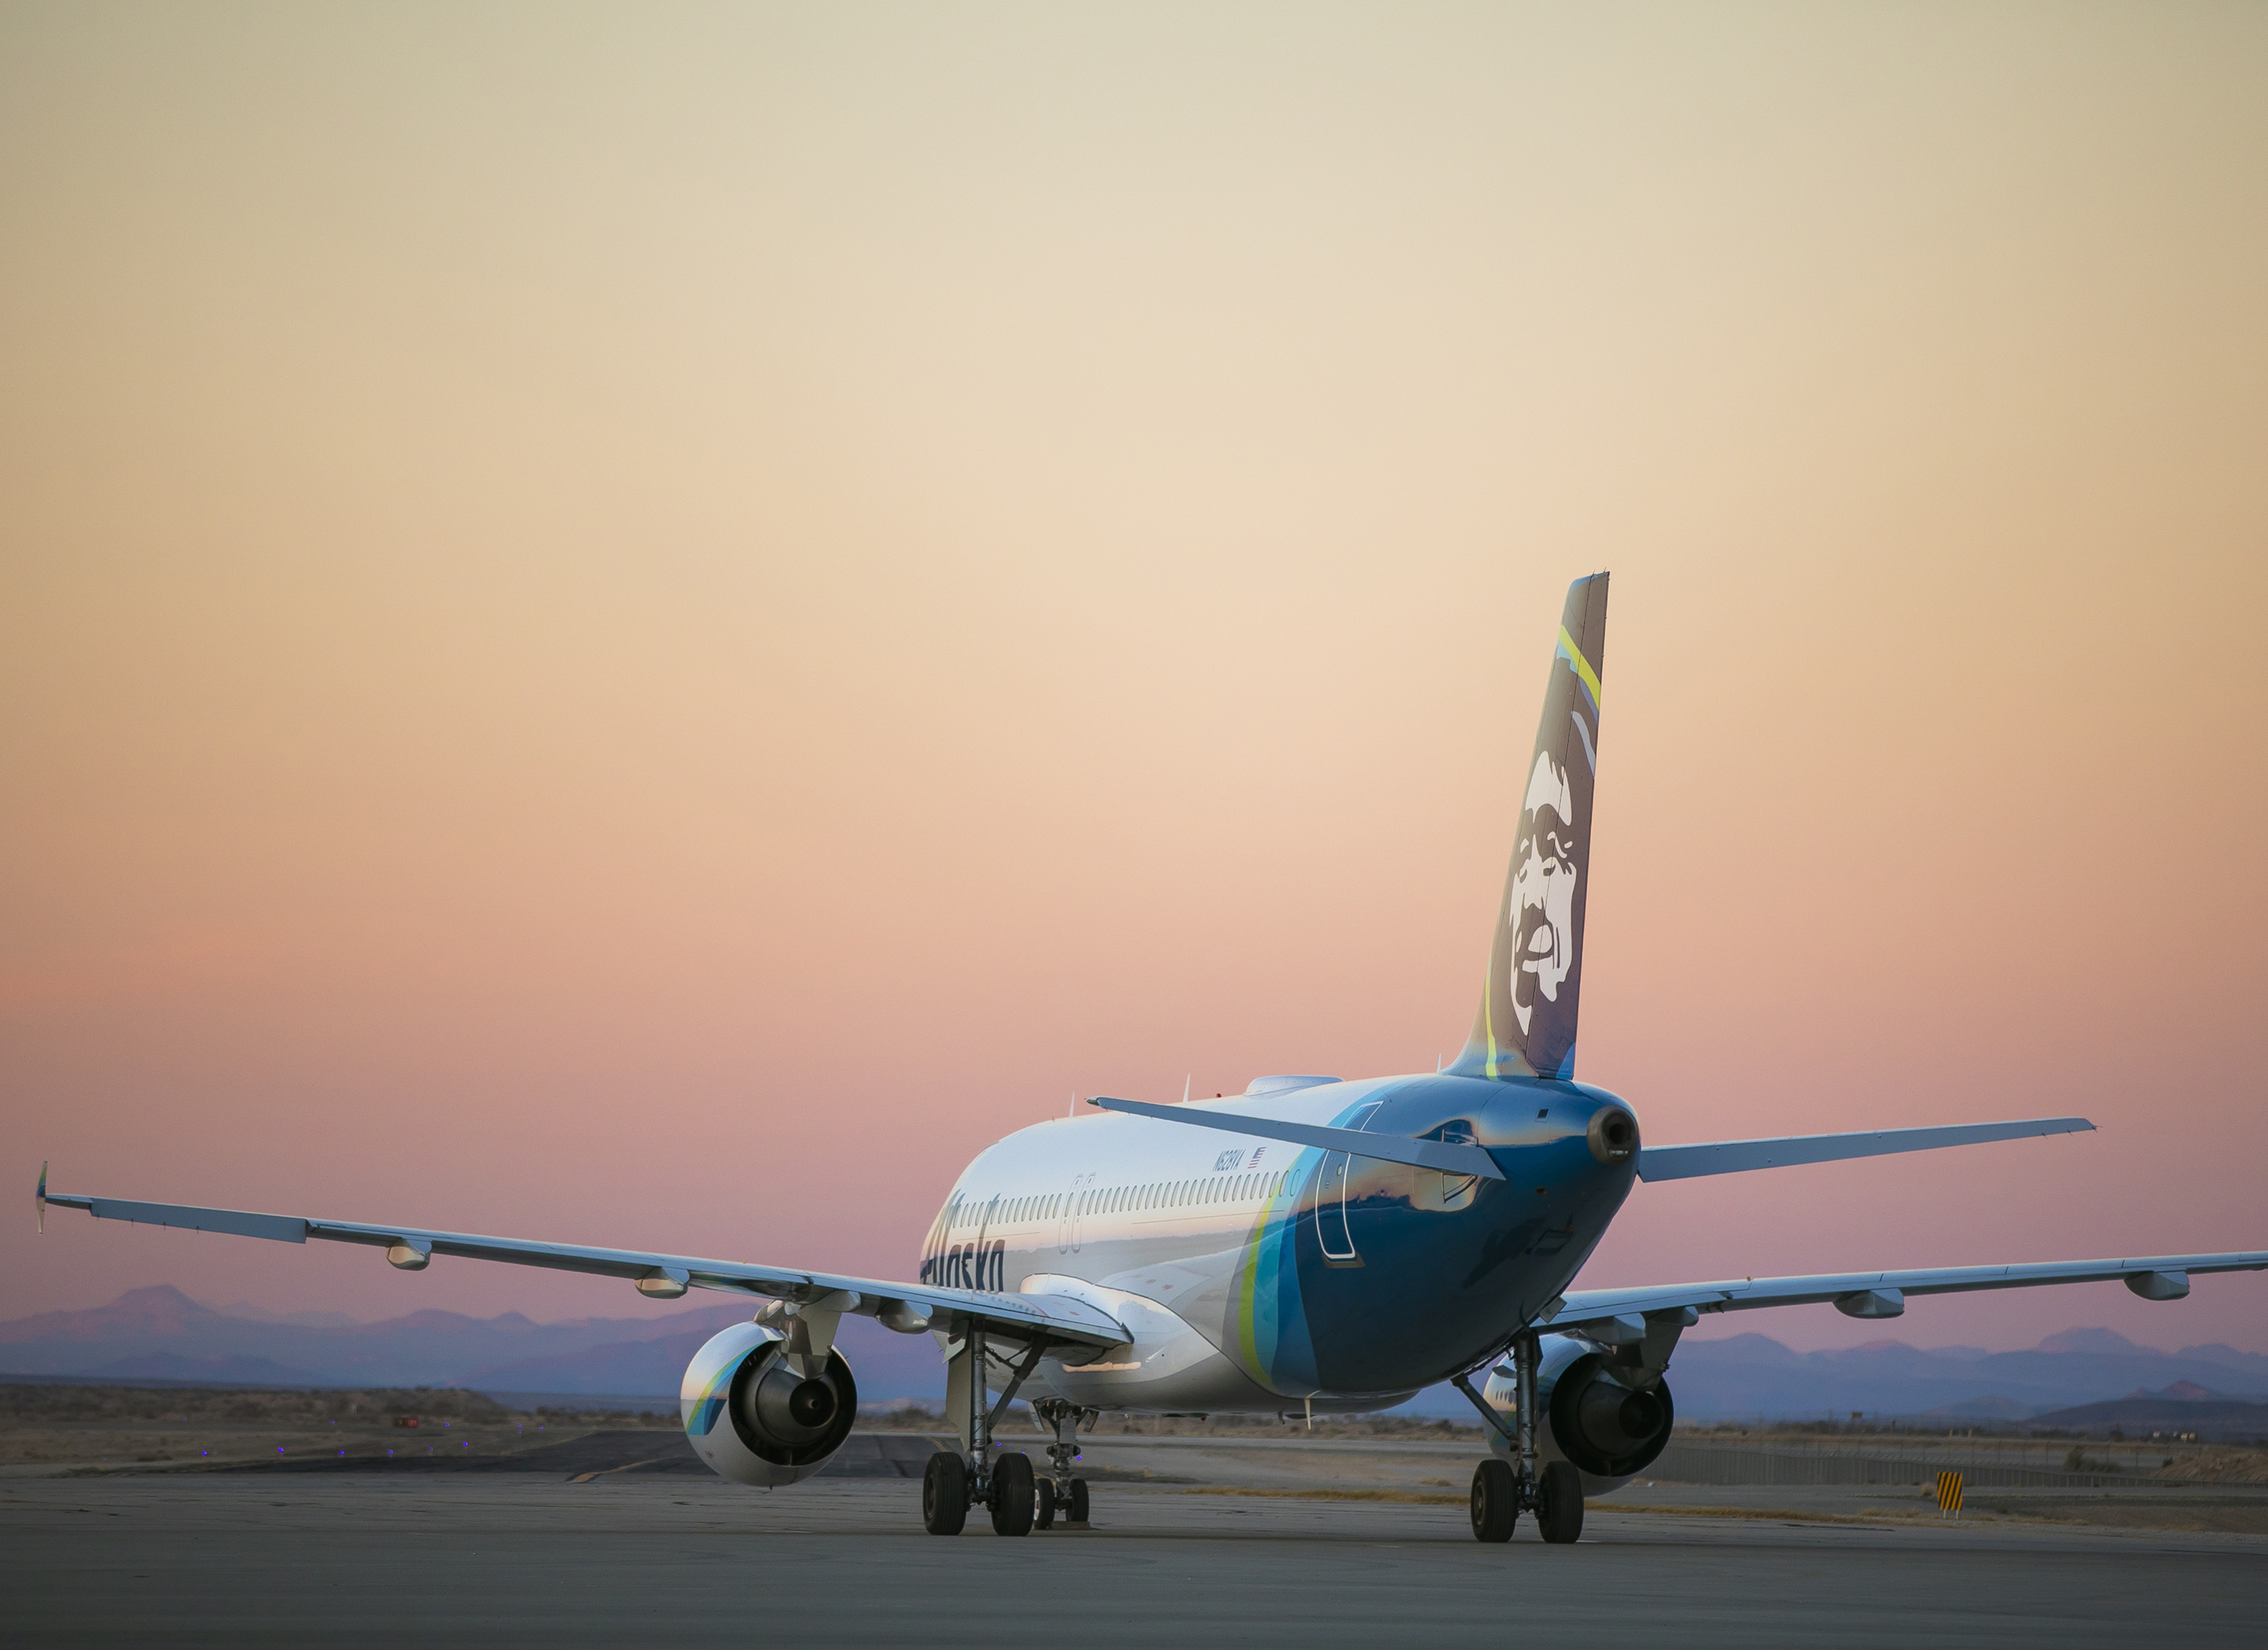 Alaska Airlines’ redesigned travel experience meets guests’ needs for control and comfort with amenities and conveniences developed for the modern traveler to fly smart and land happy.